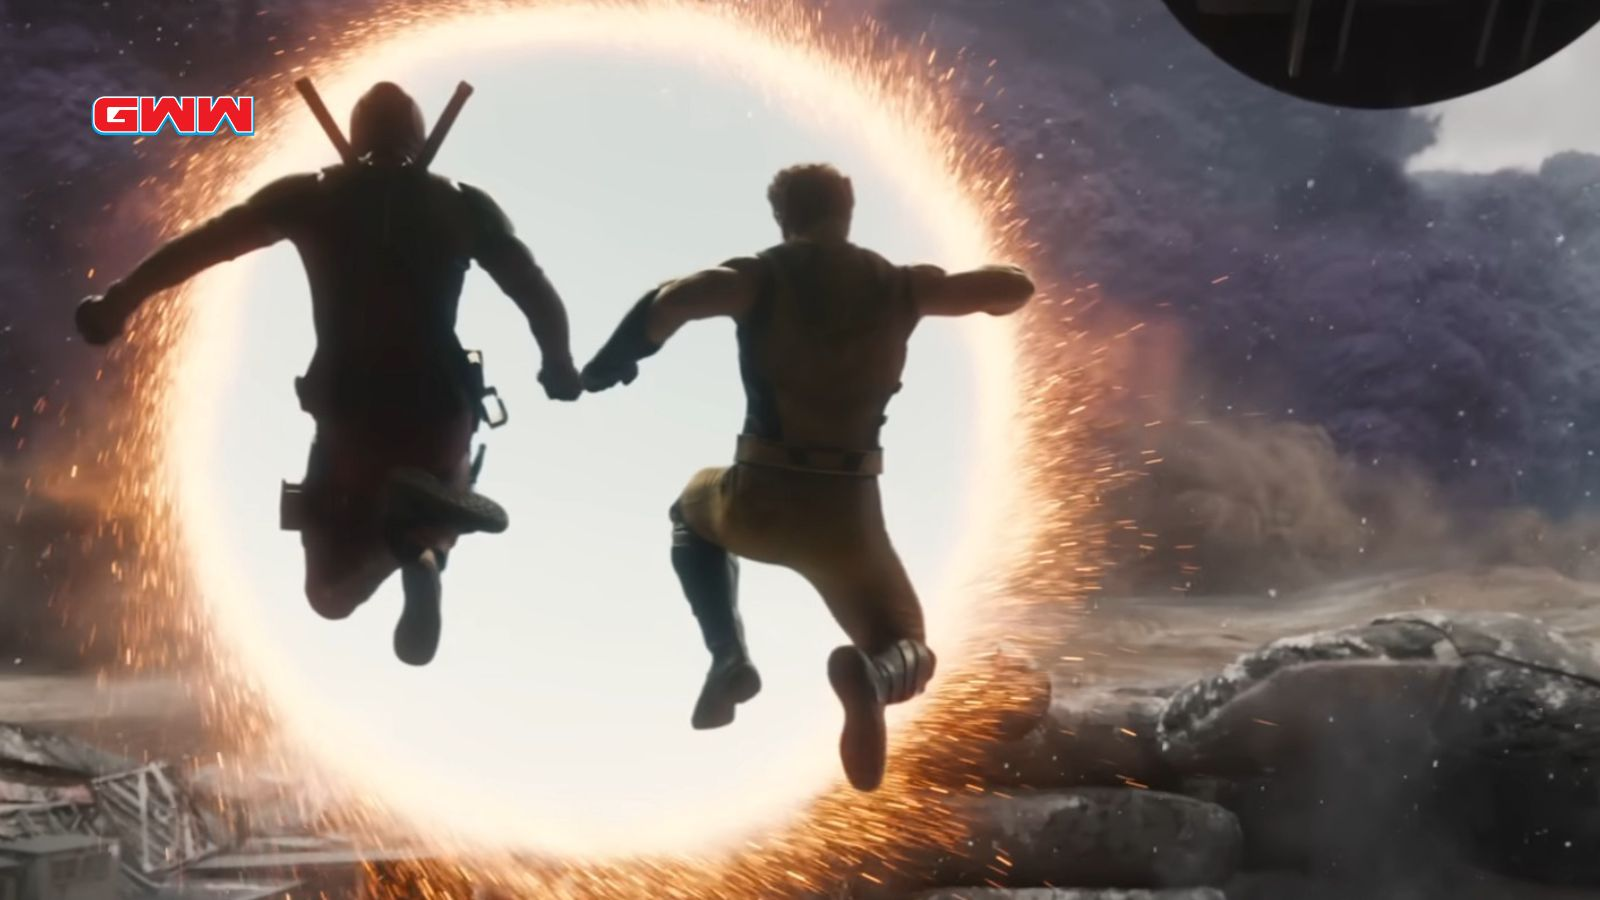 Two heroes jumping through a fiery portal holding hands.